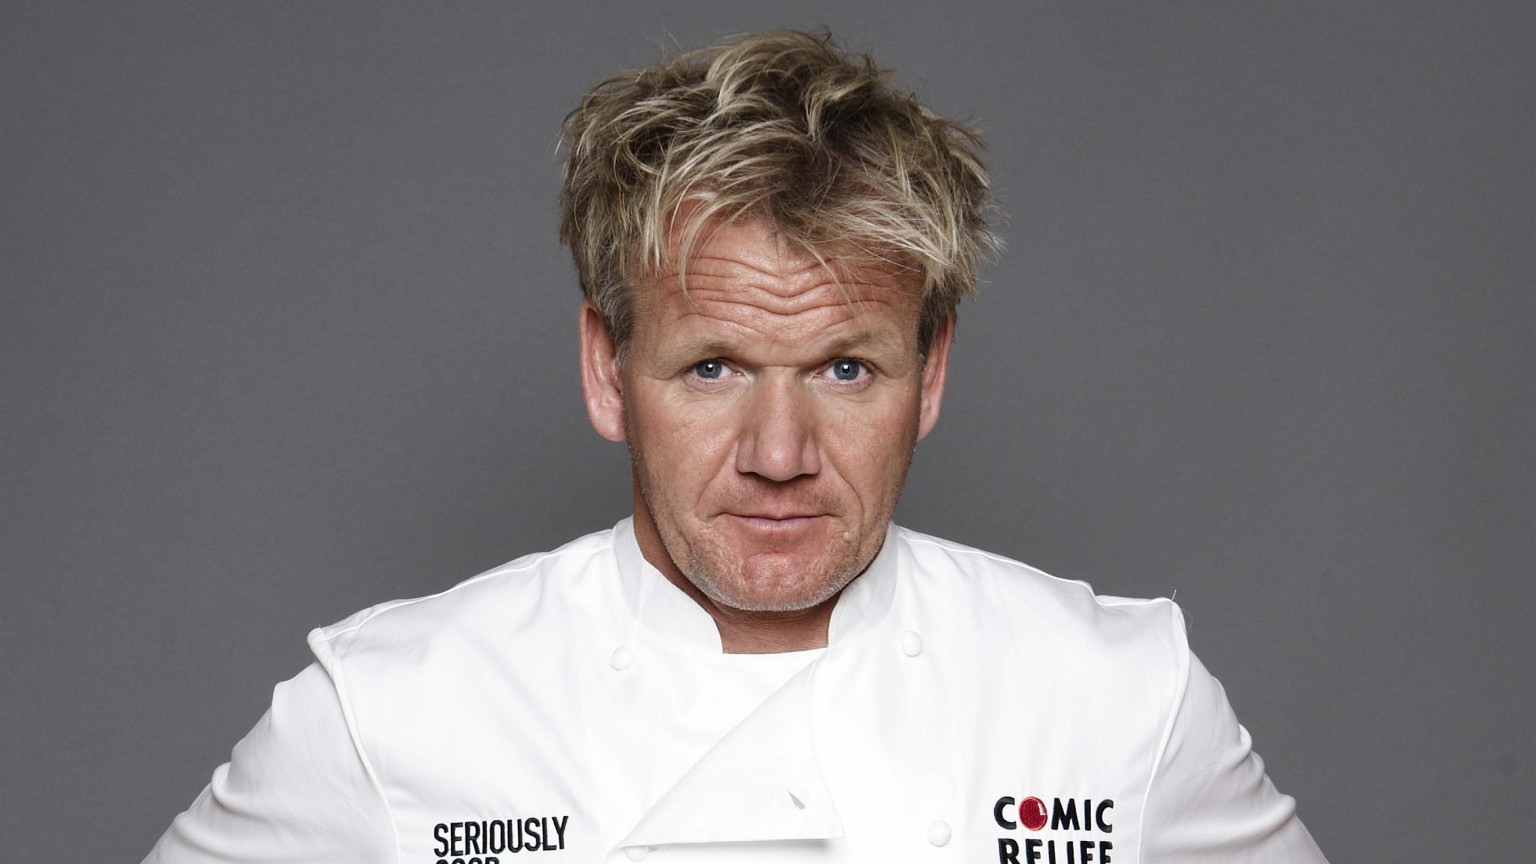 Gordon Ramsay's seriously good iPhone app | Comic Relief